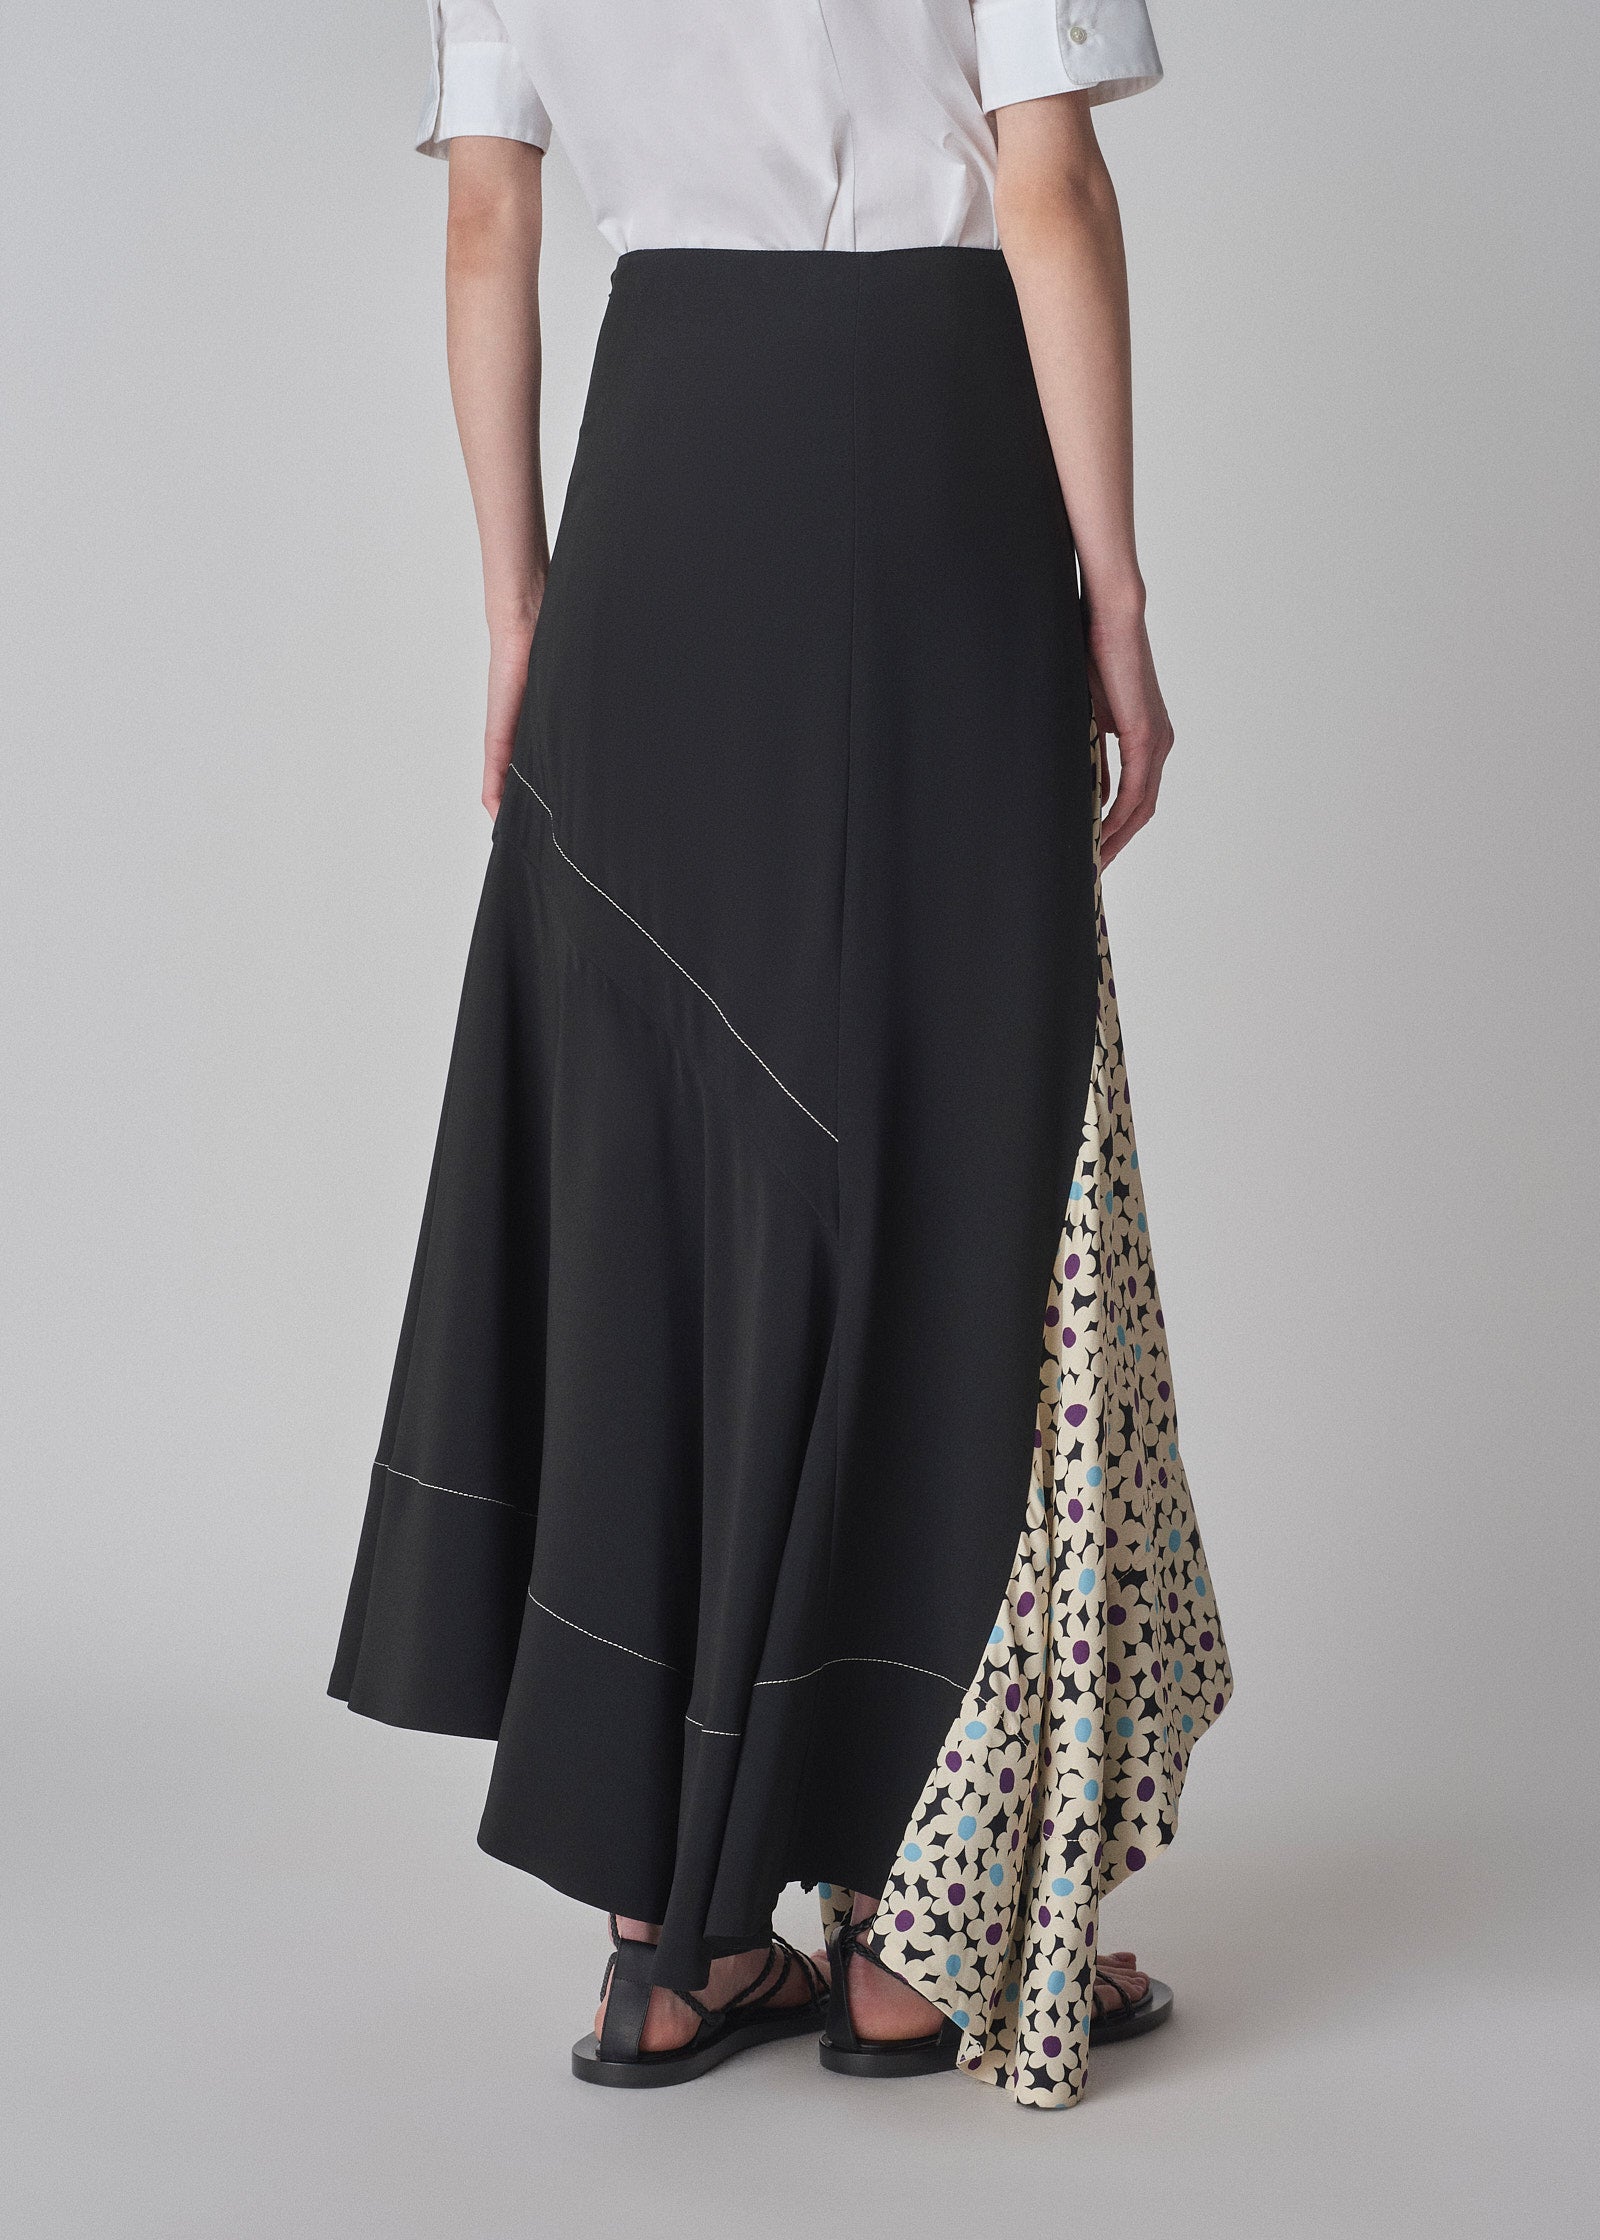 Patchwork Drape Skirt in Satin Viscose - Black - CO Collections